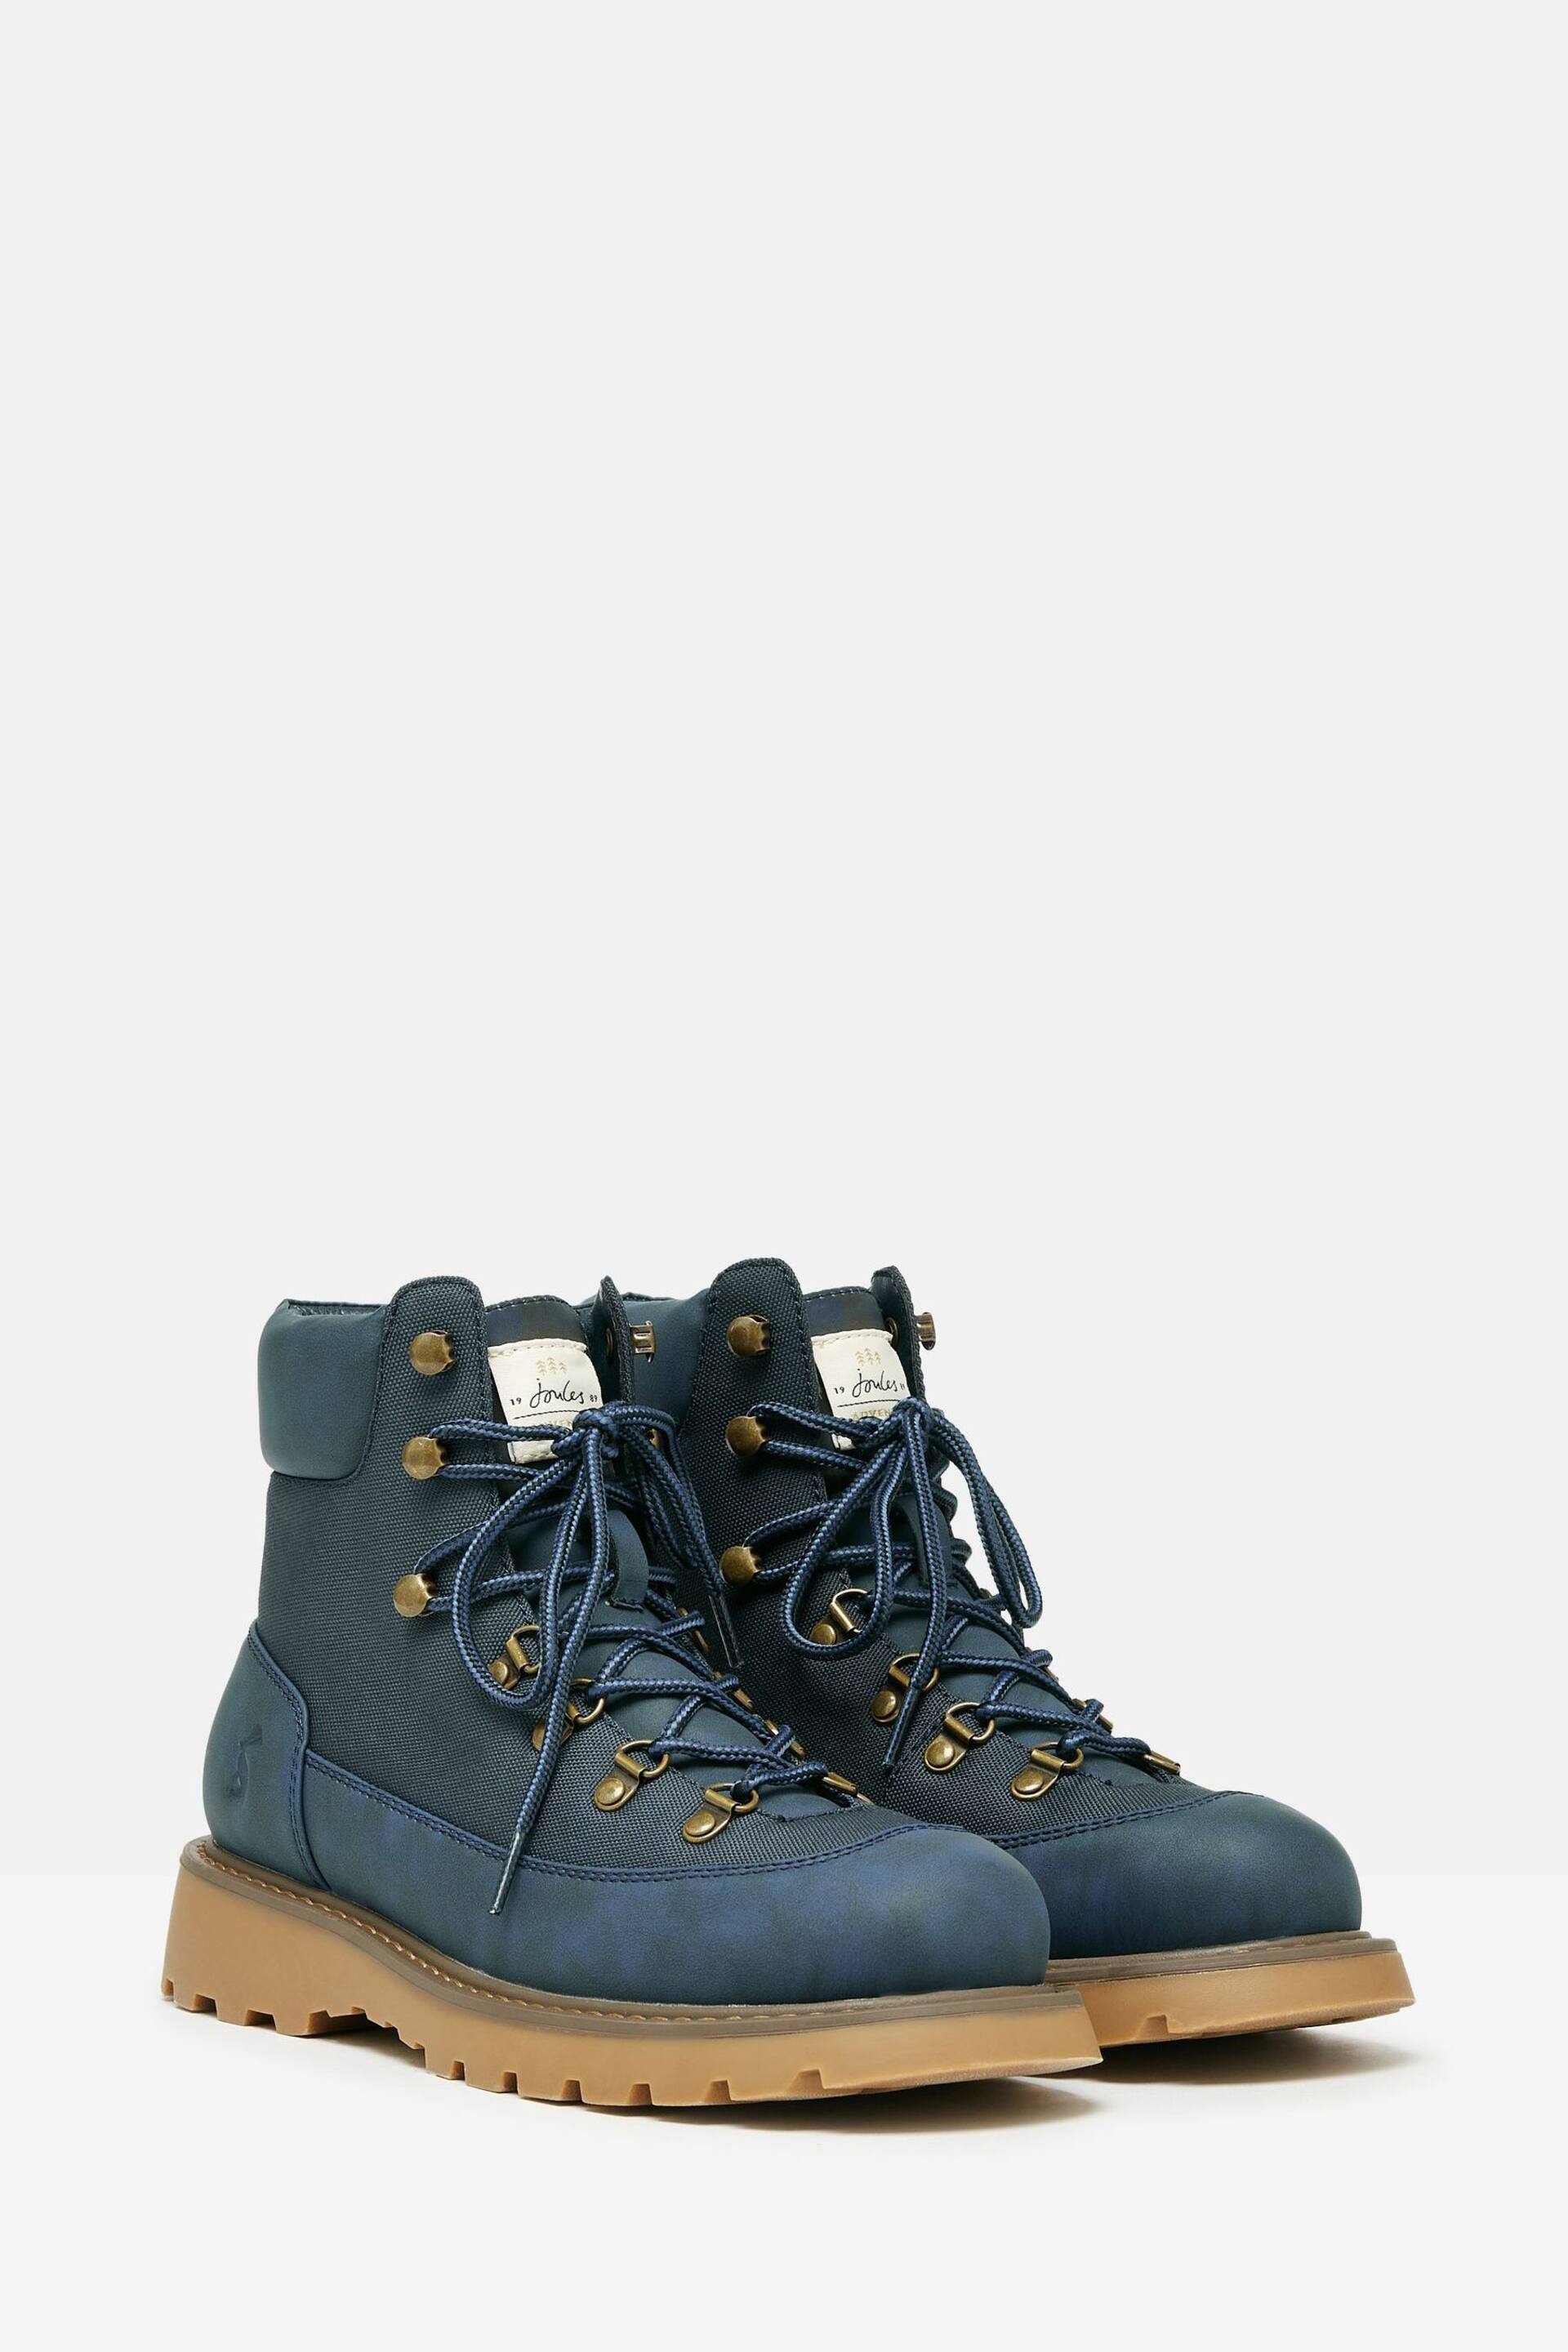 Joules Kendall Navy Lace-Up Boots - Image 2 of 8